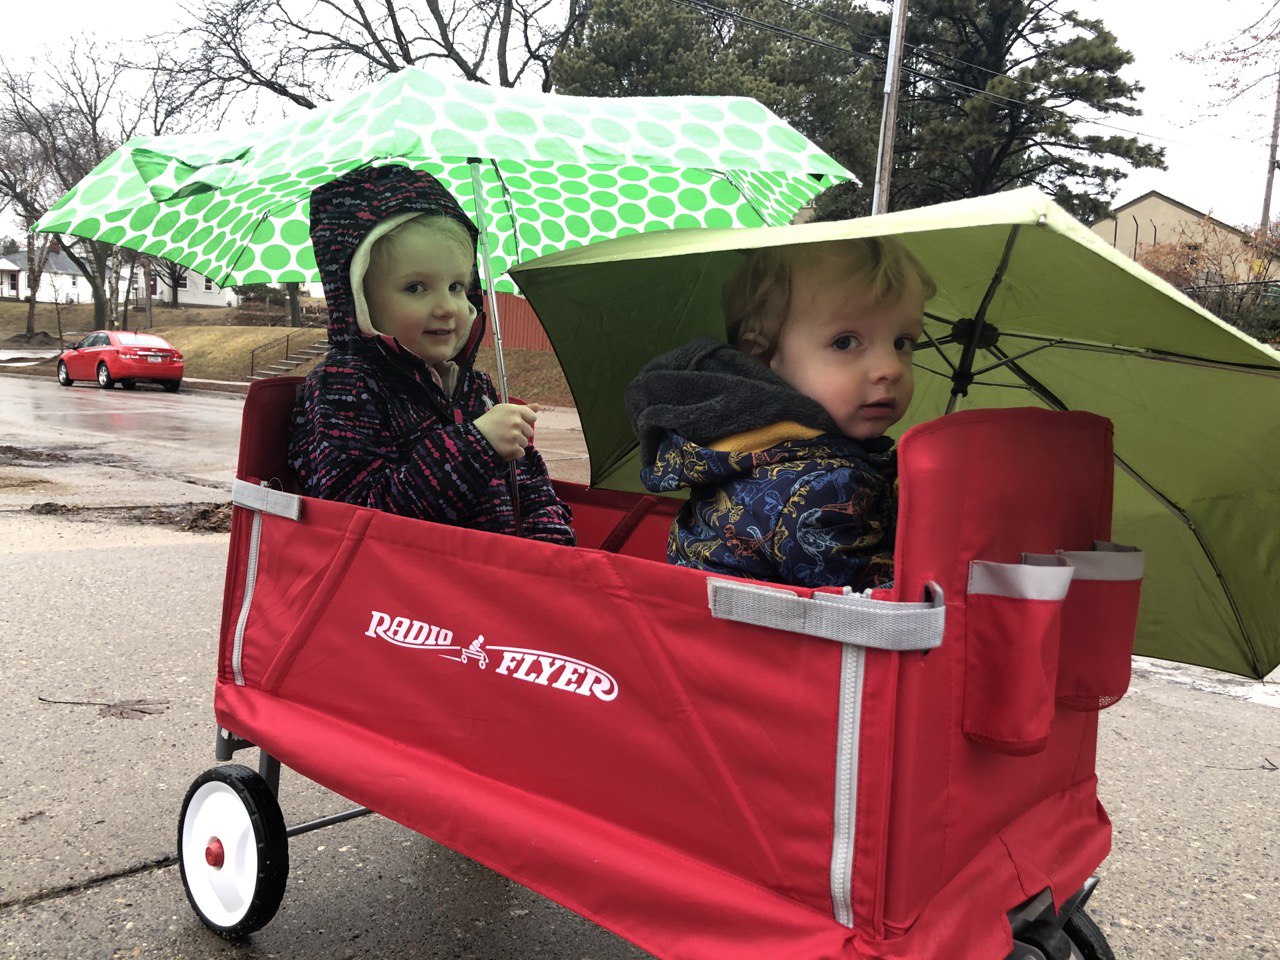 Imogene and Brennan were even good sports with getting outdoors on rainy days.